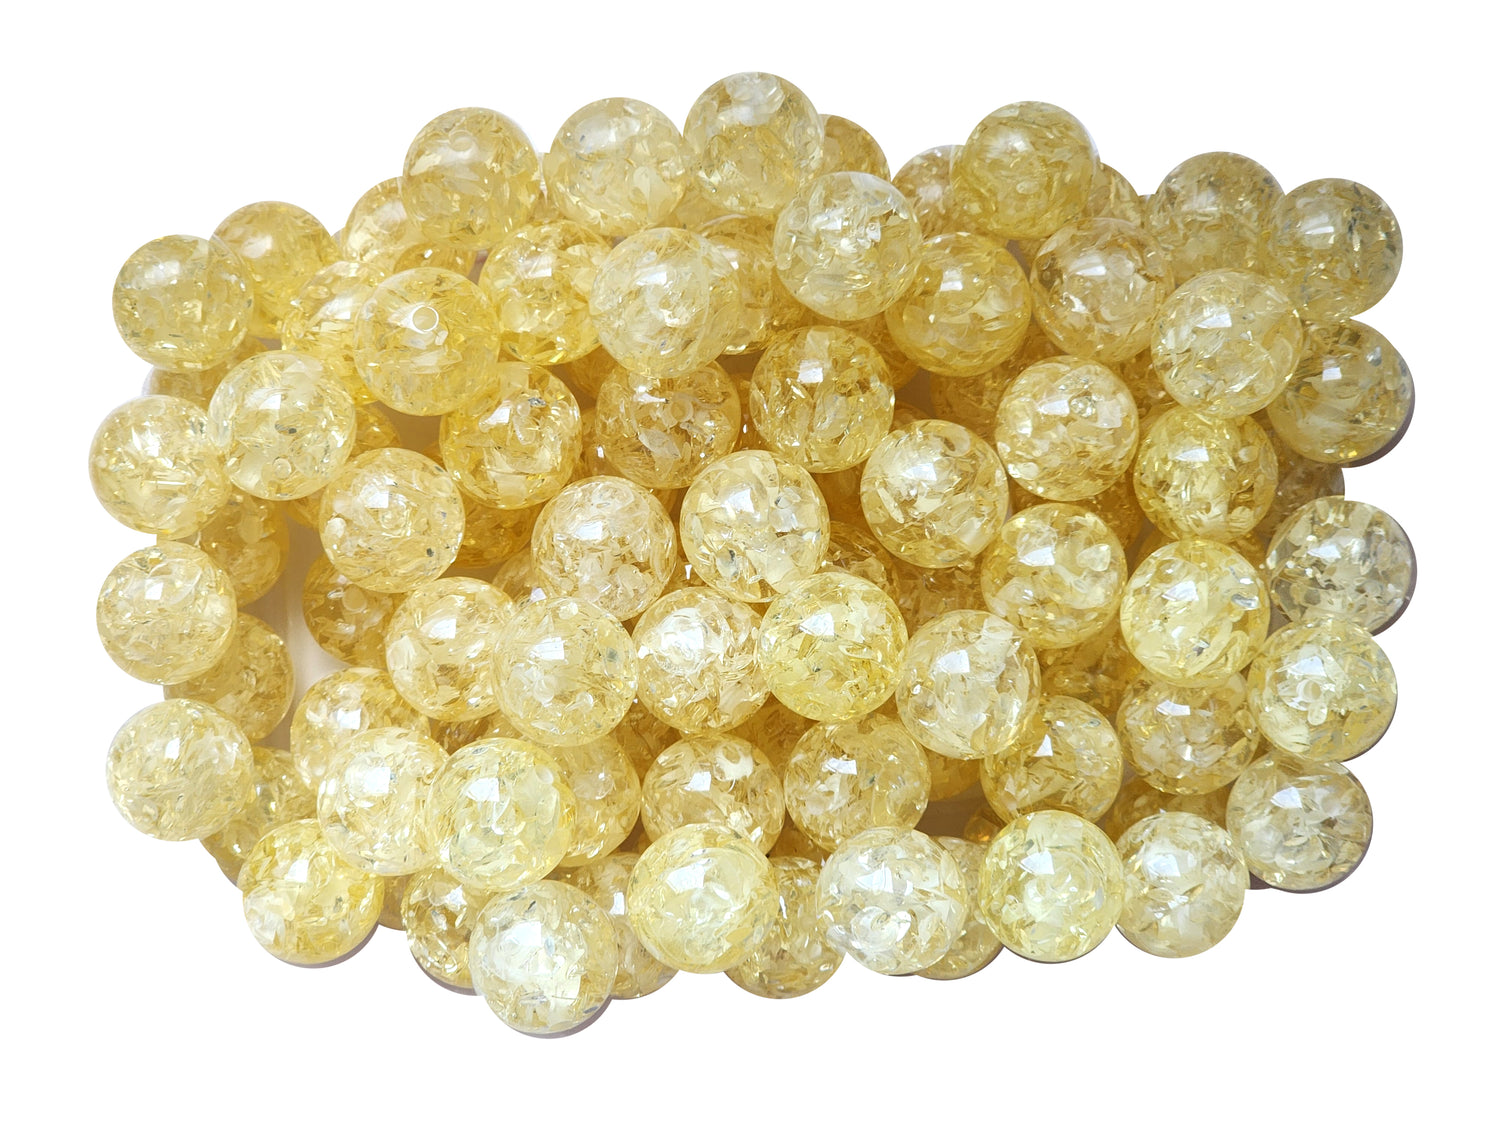 yellow stained glass 20mm bubblegum beads